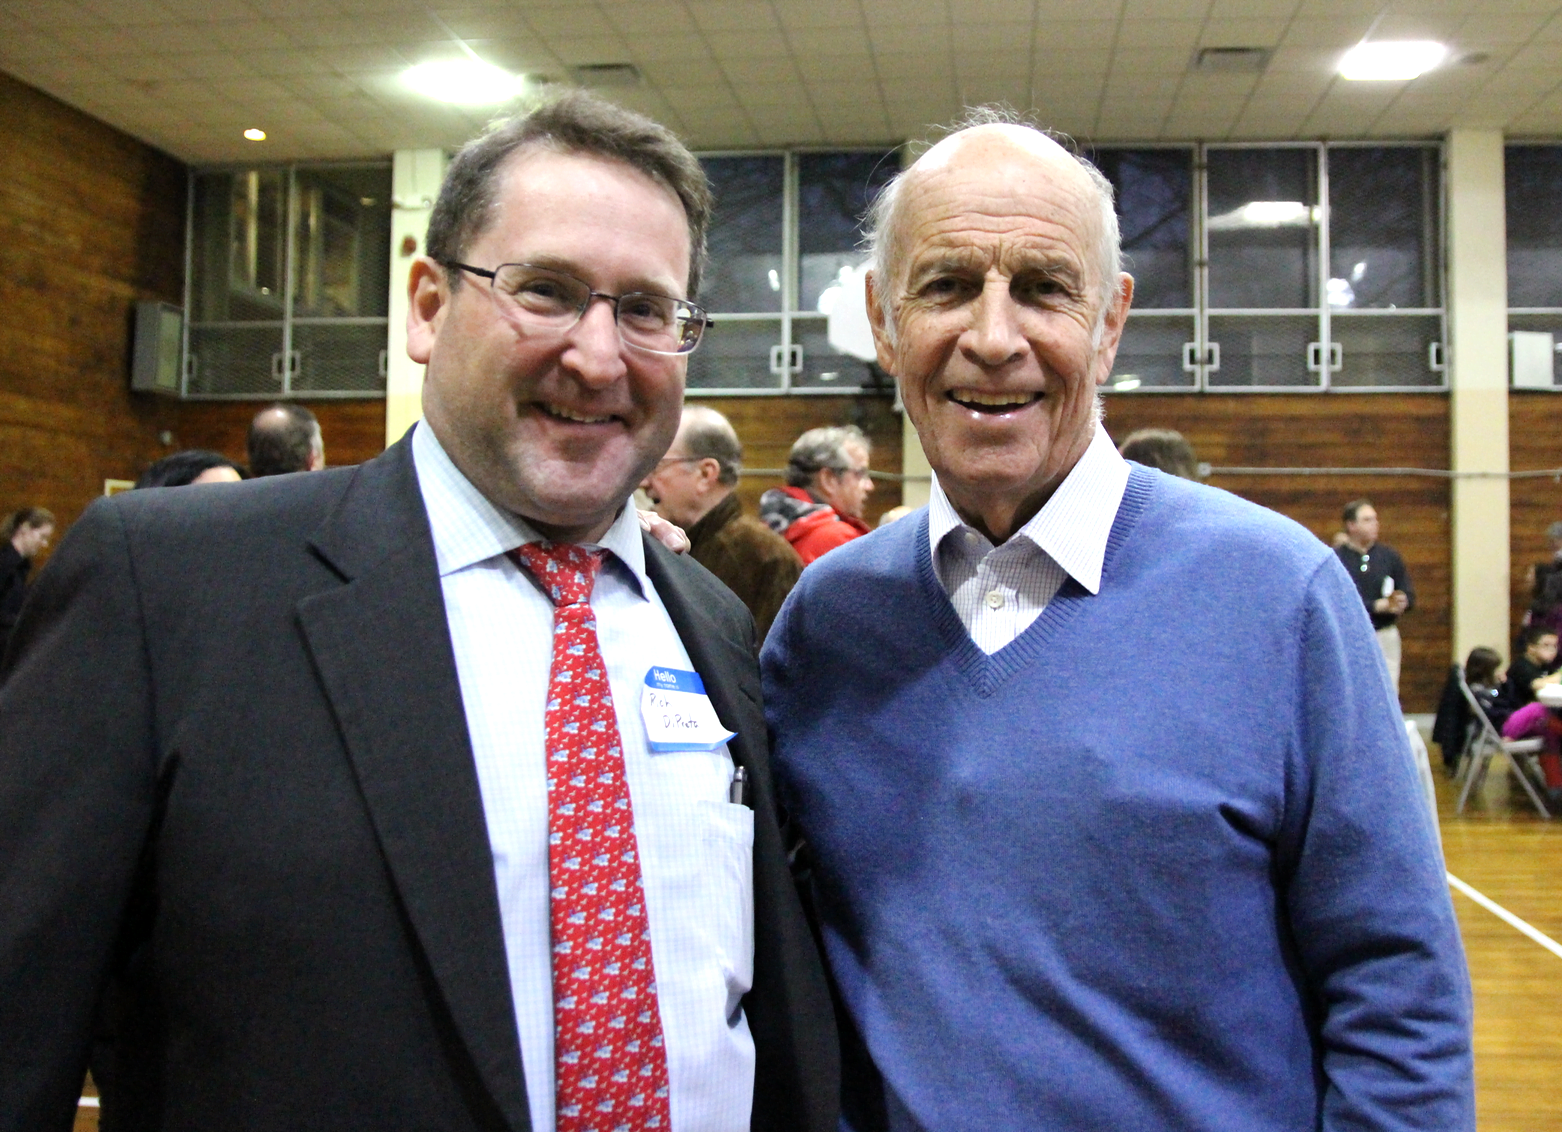 RTC Chair Rich DiPreta and Former State Senate 36th District Bill Nickerson. April 9, 2019 Photo: Leslie Yager